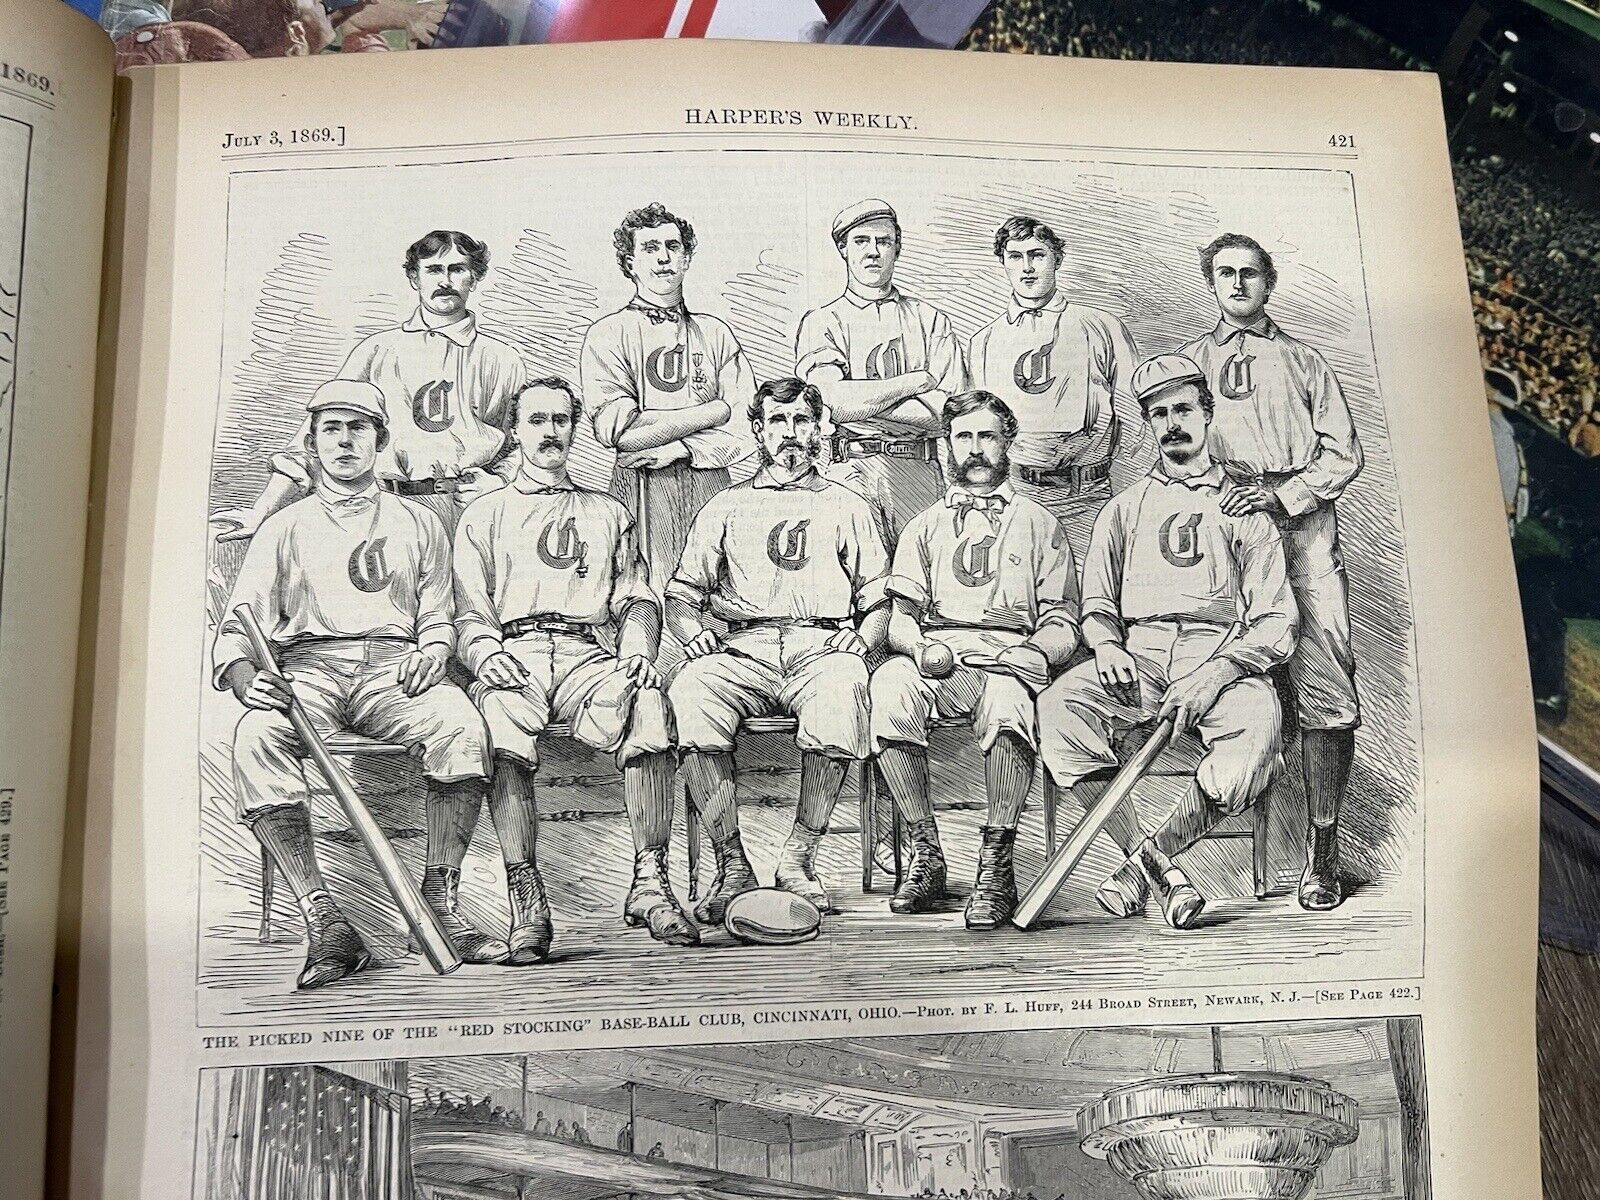 Harpers Weekly; July 1869 With Baseball’s FIRST EVER PROFESSIONAL BASEBALL TEAM